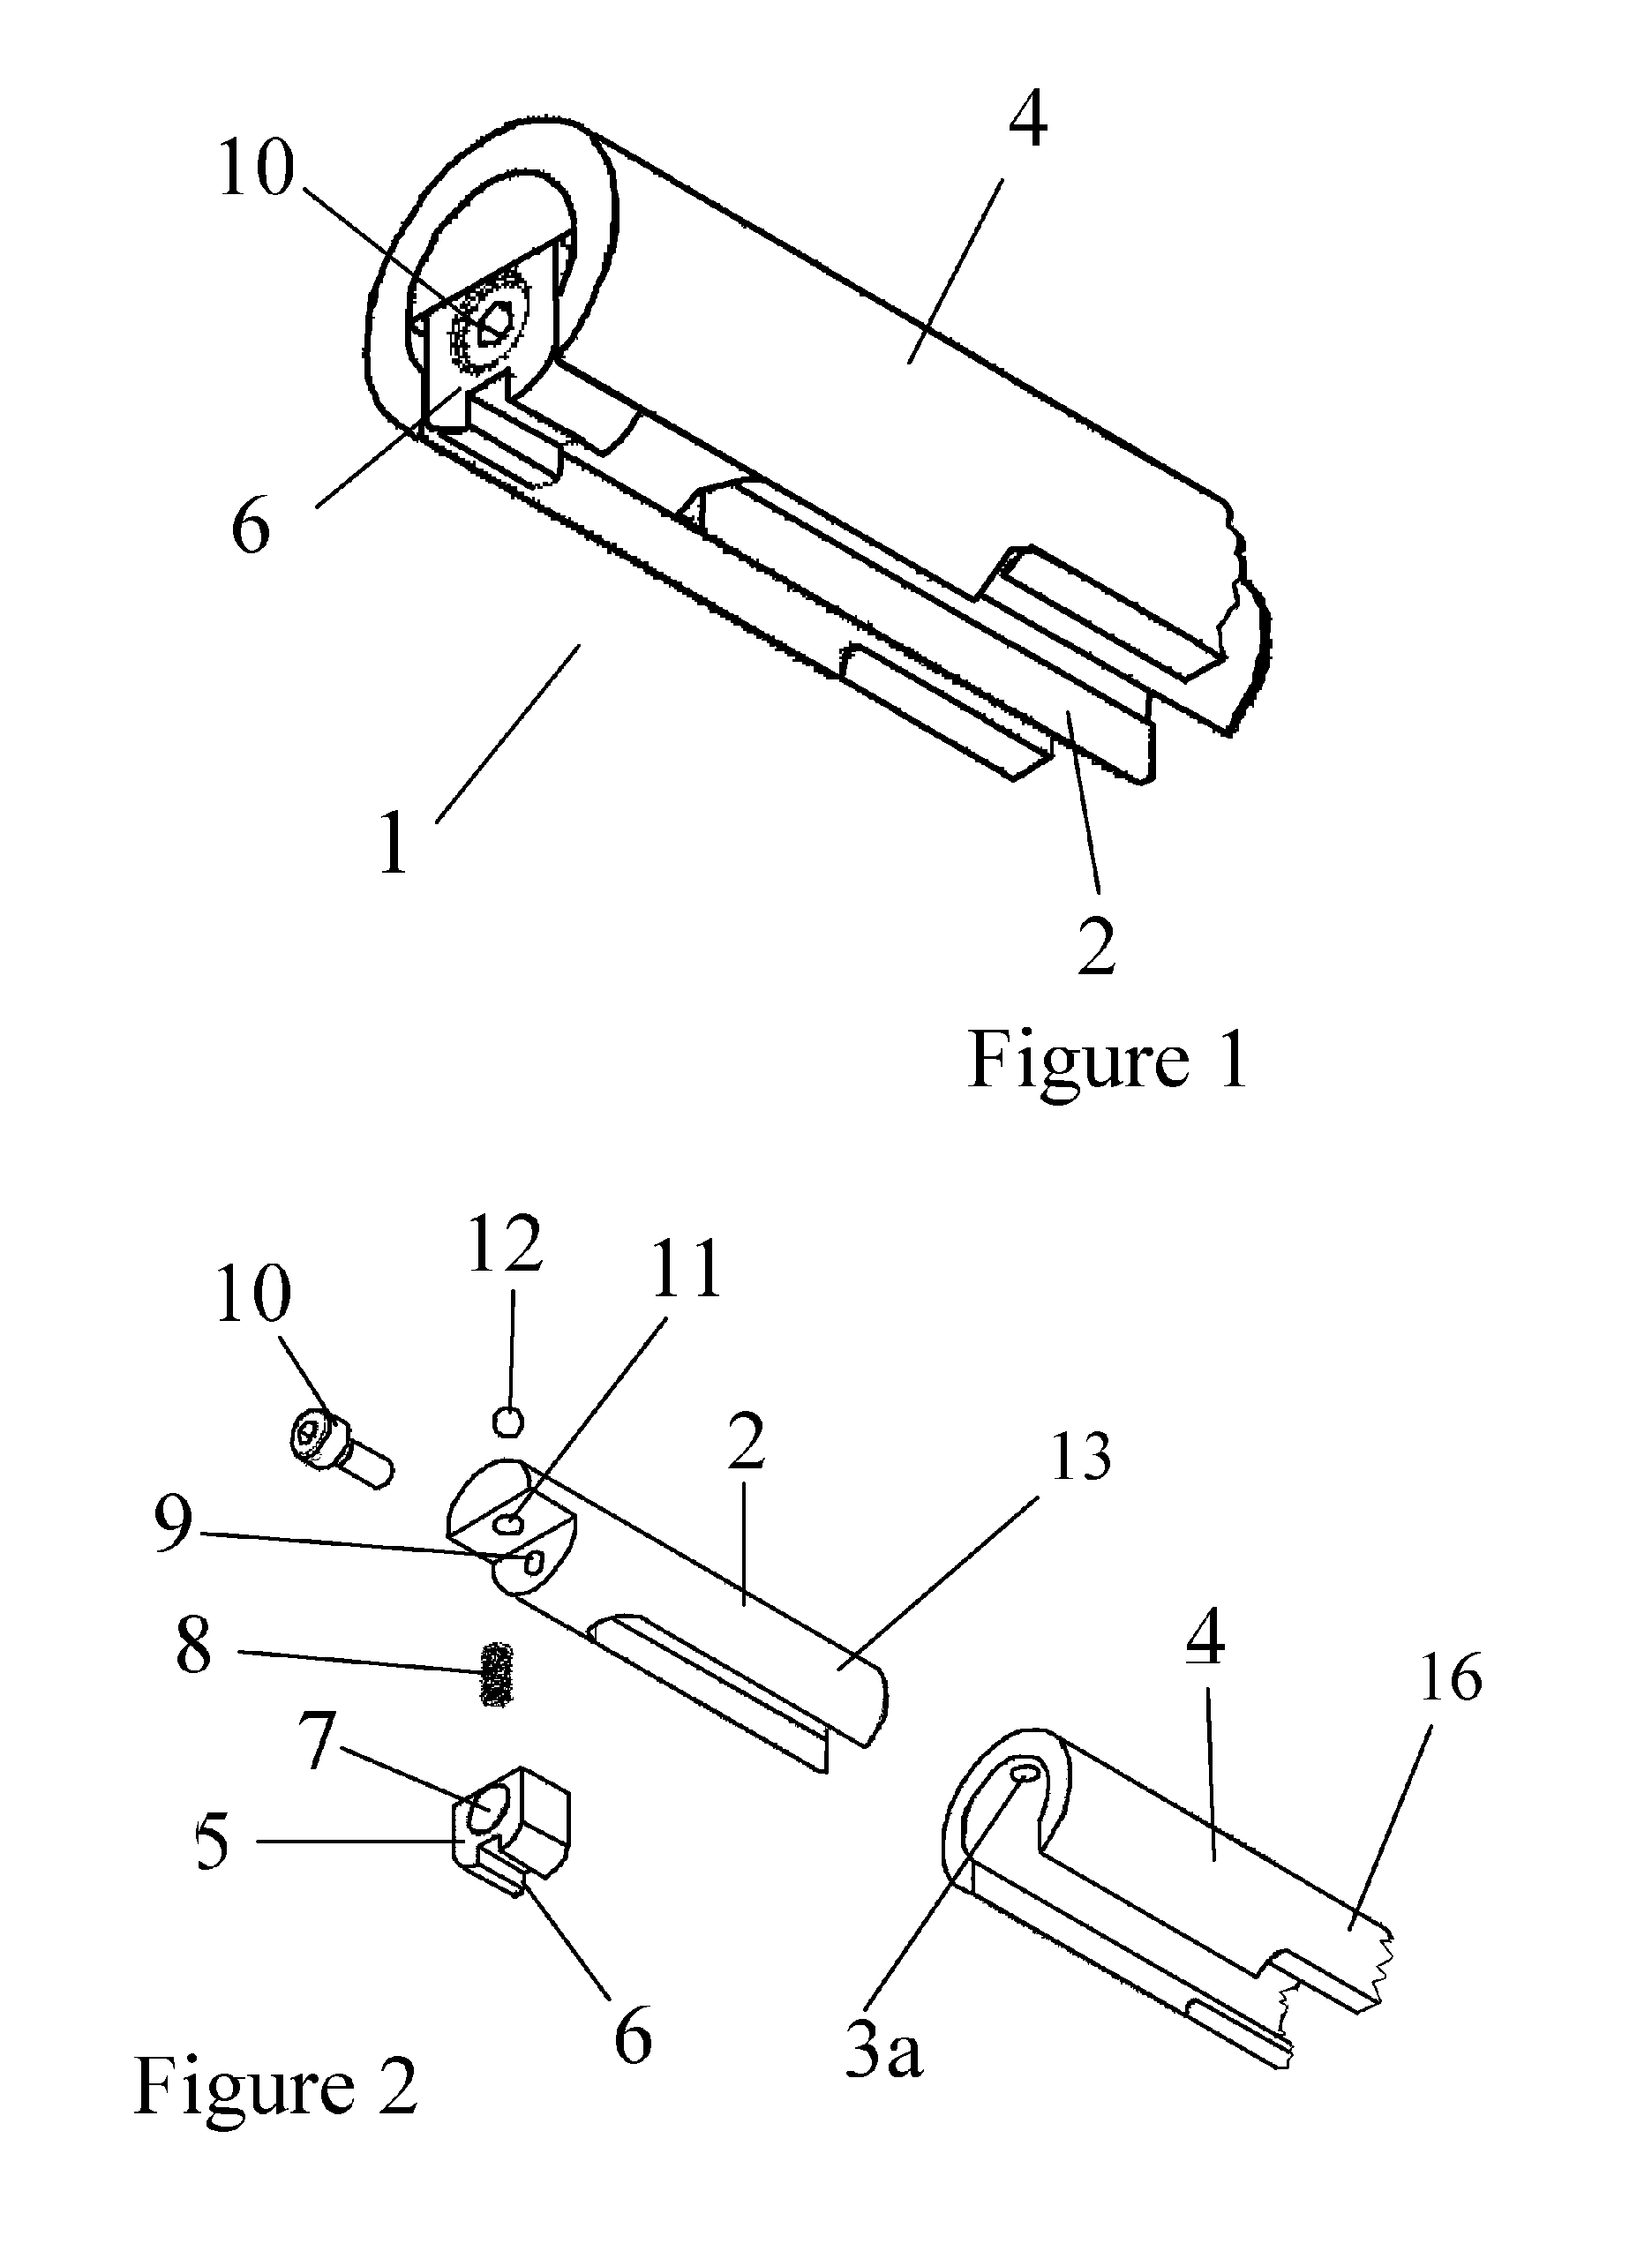 Firing rate reduction system for an automatic firearm